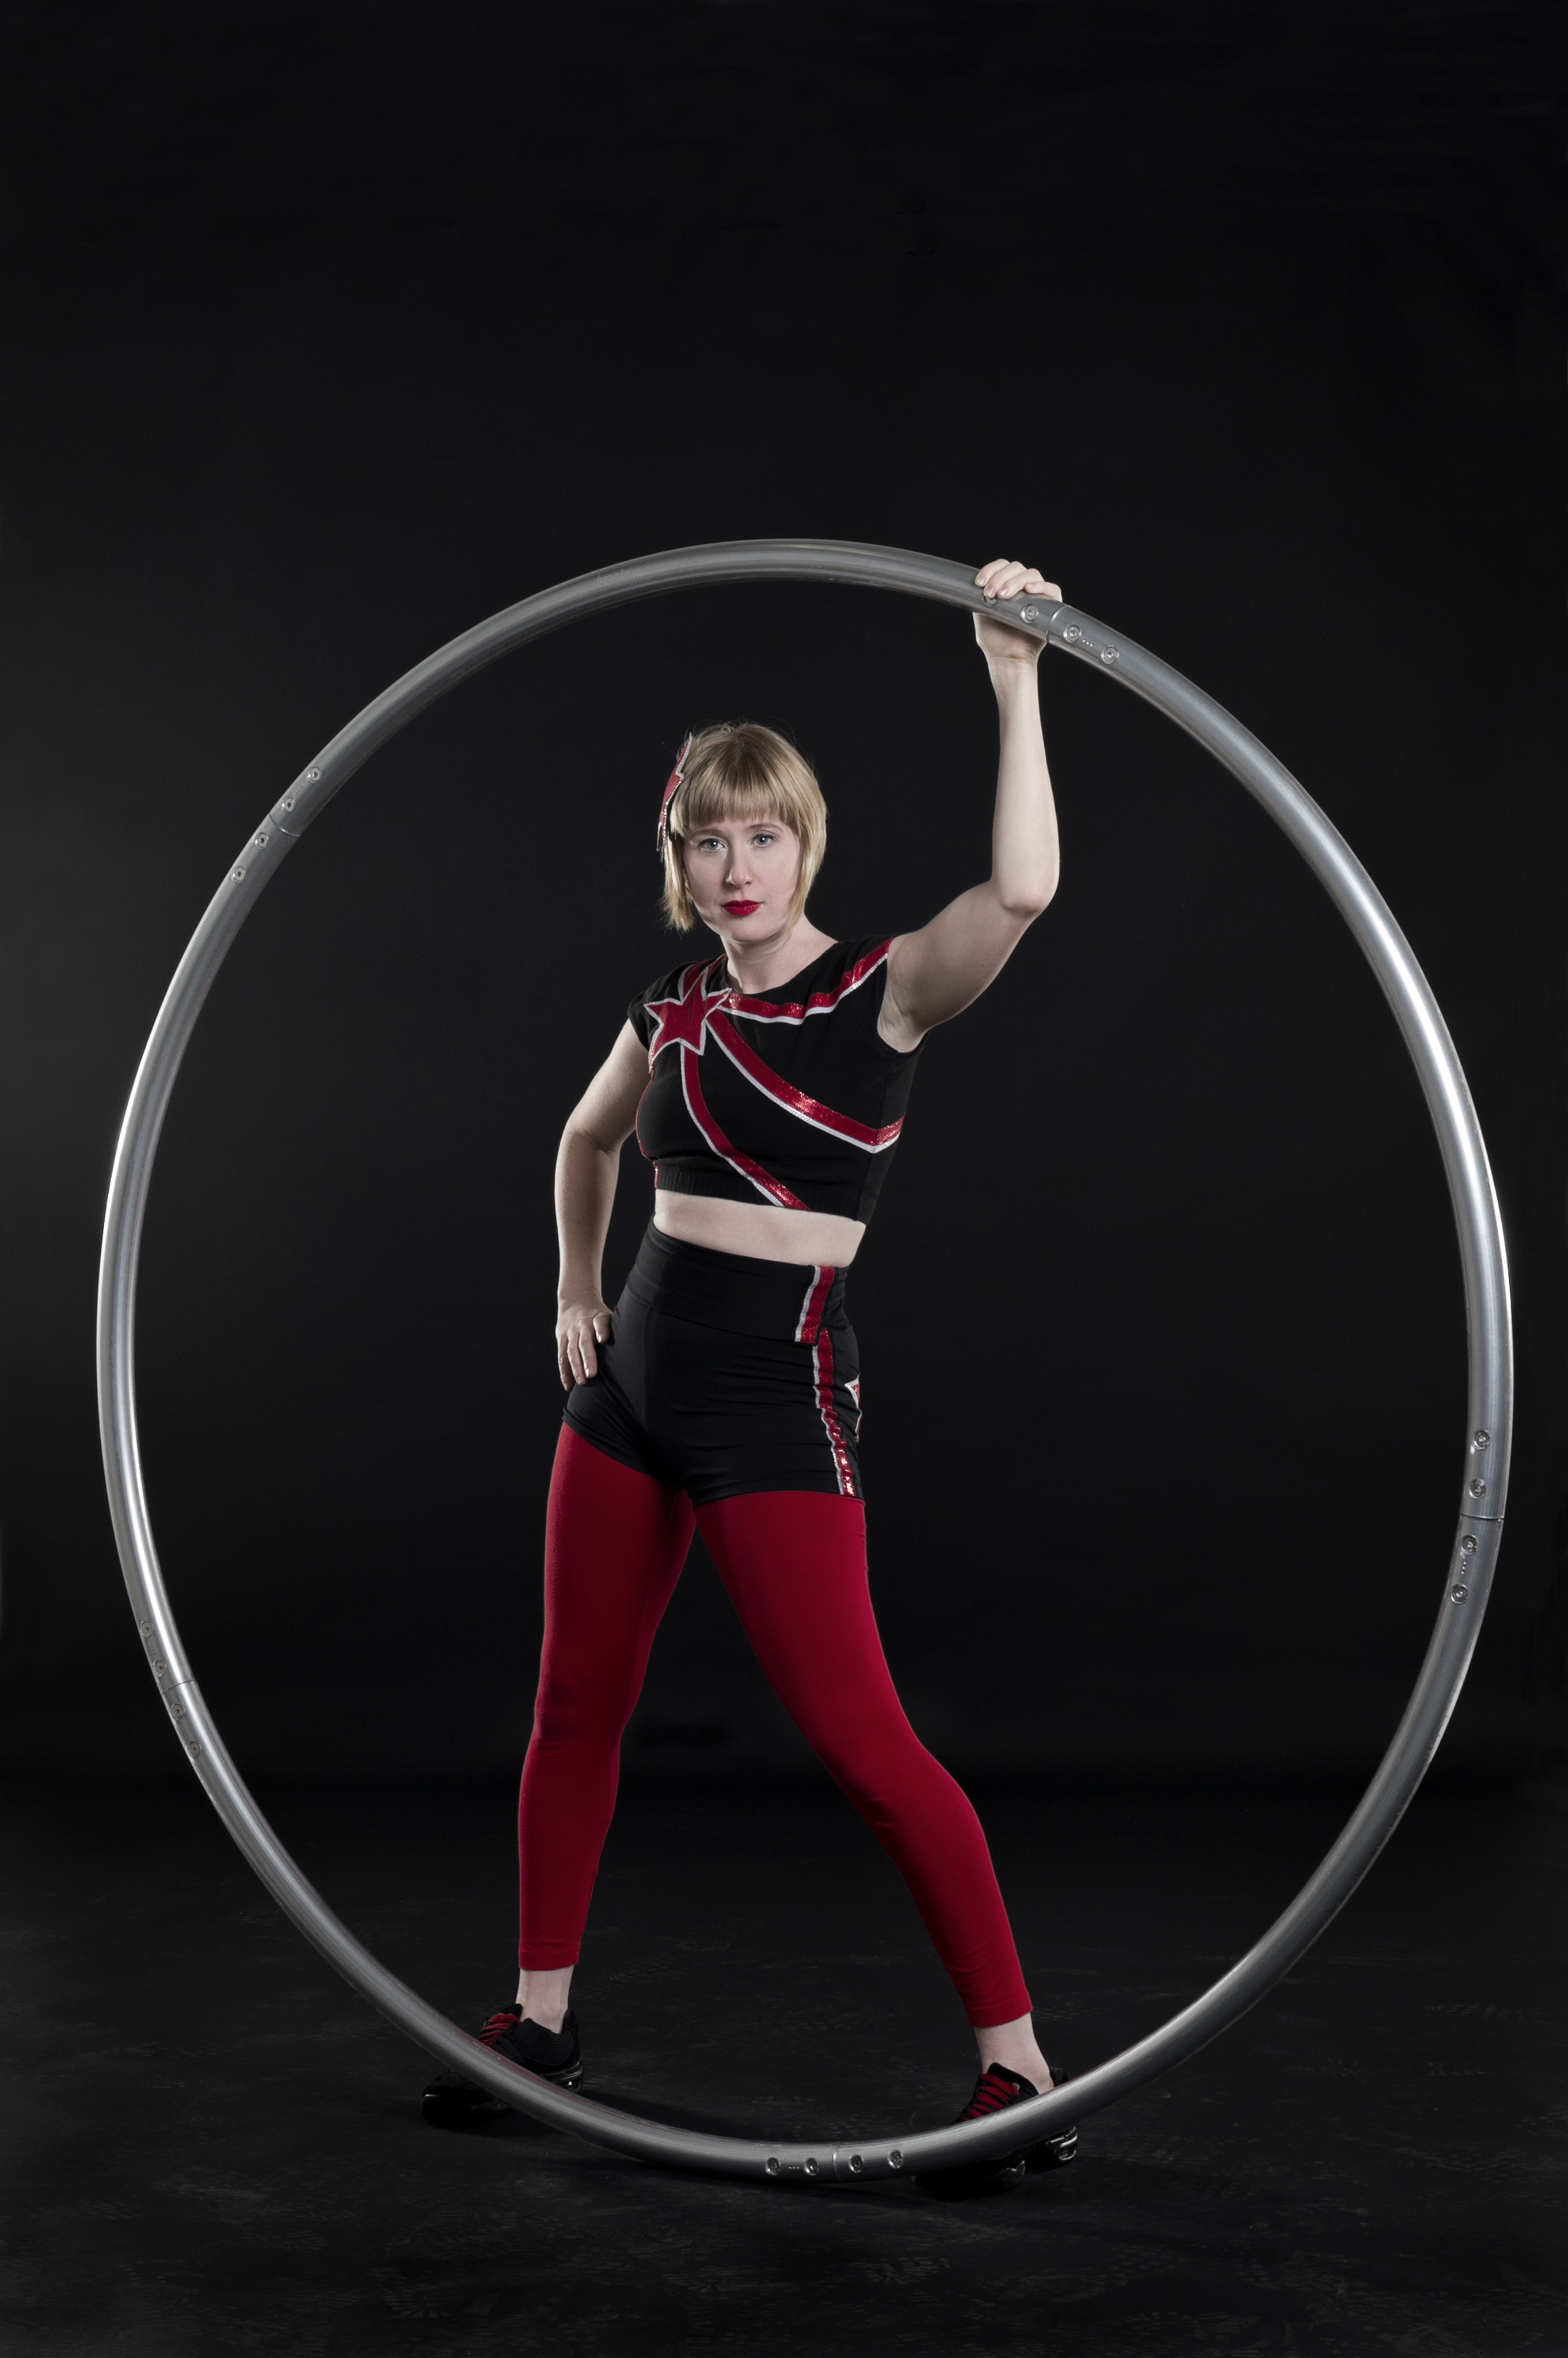 bex in motion posing with a cyr wheel